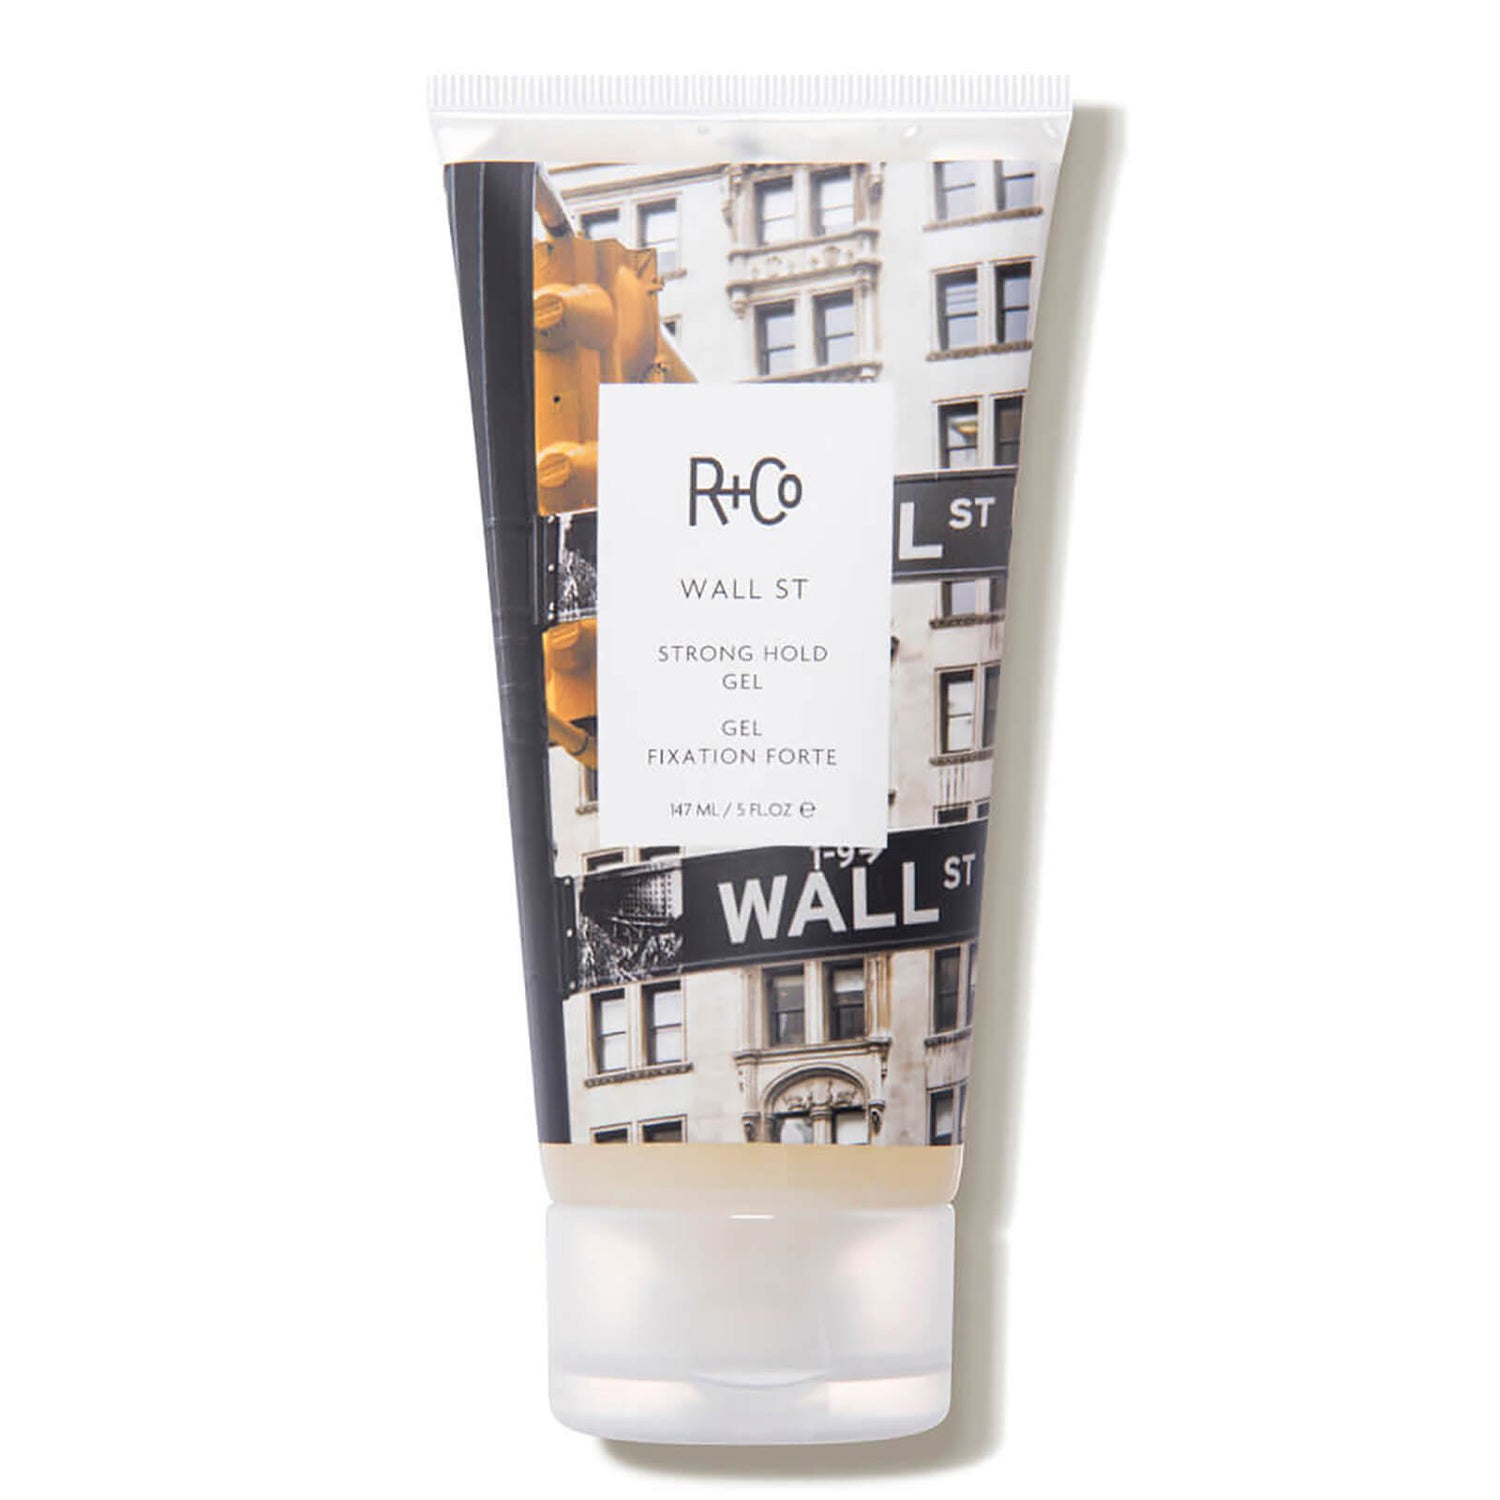 R+Co WALL ST Strong Hold Gel (5 fl. oz.)